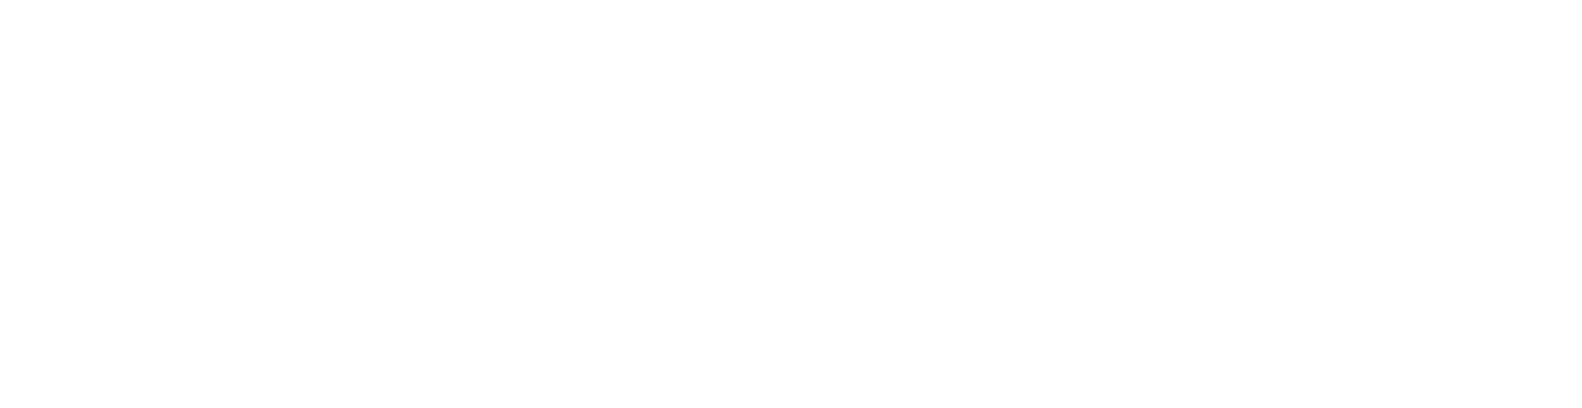 Titan Machinery logo large for dark backgrounds (transparent PNG)